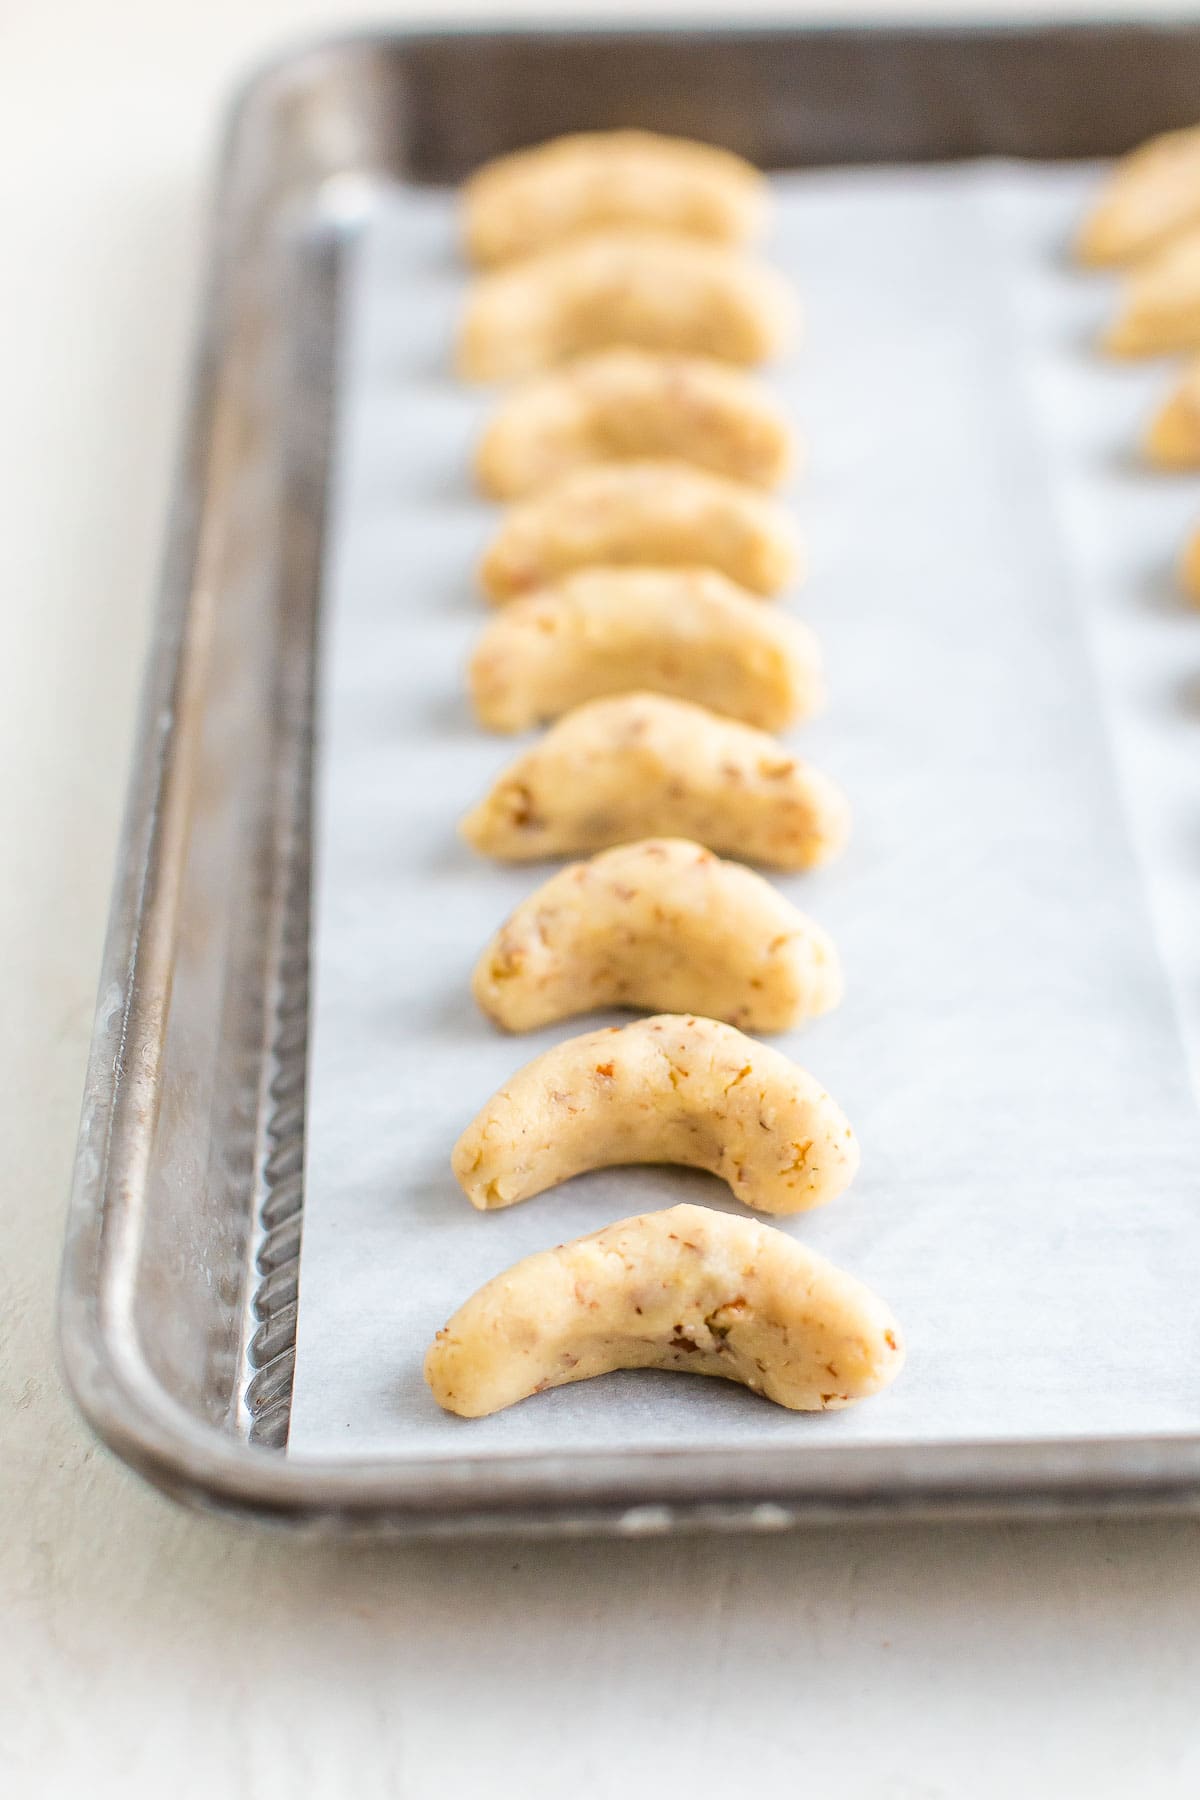 Unbaked almond crescent cookies on a baking sheet lined with parchment paper.